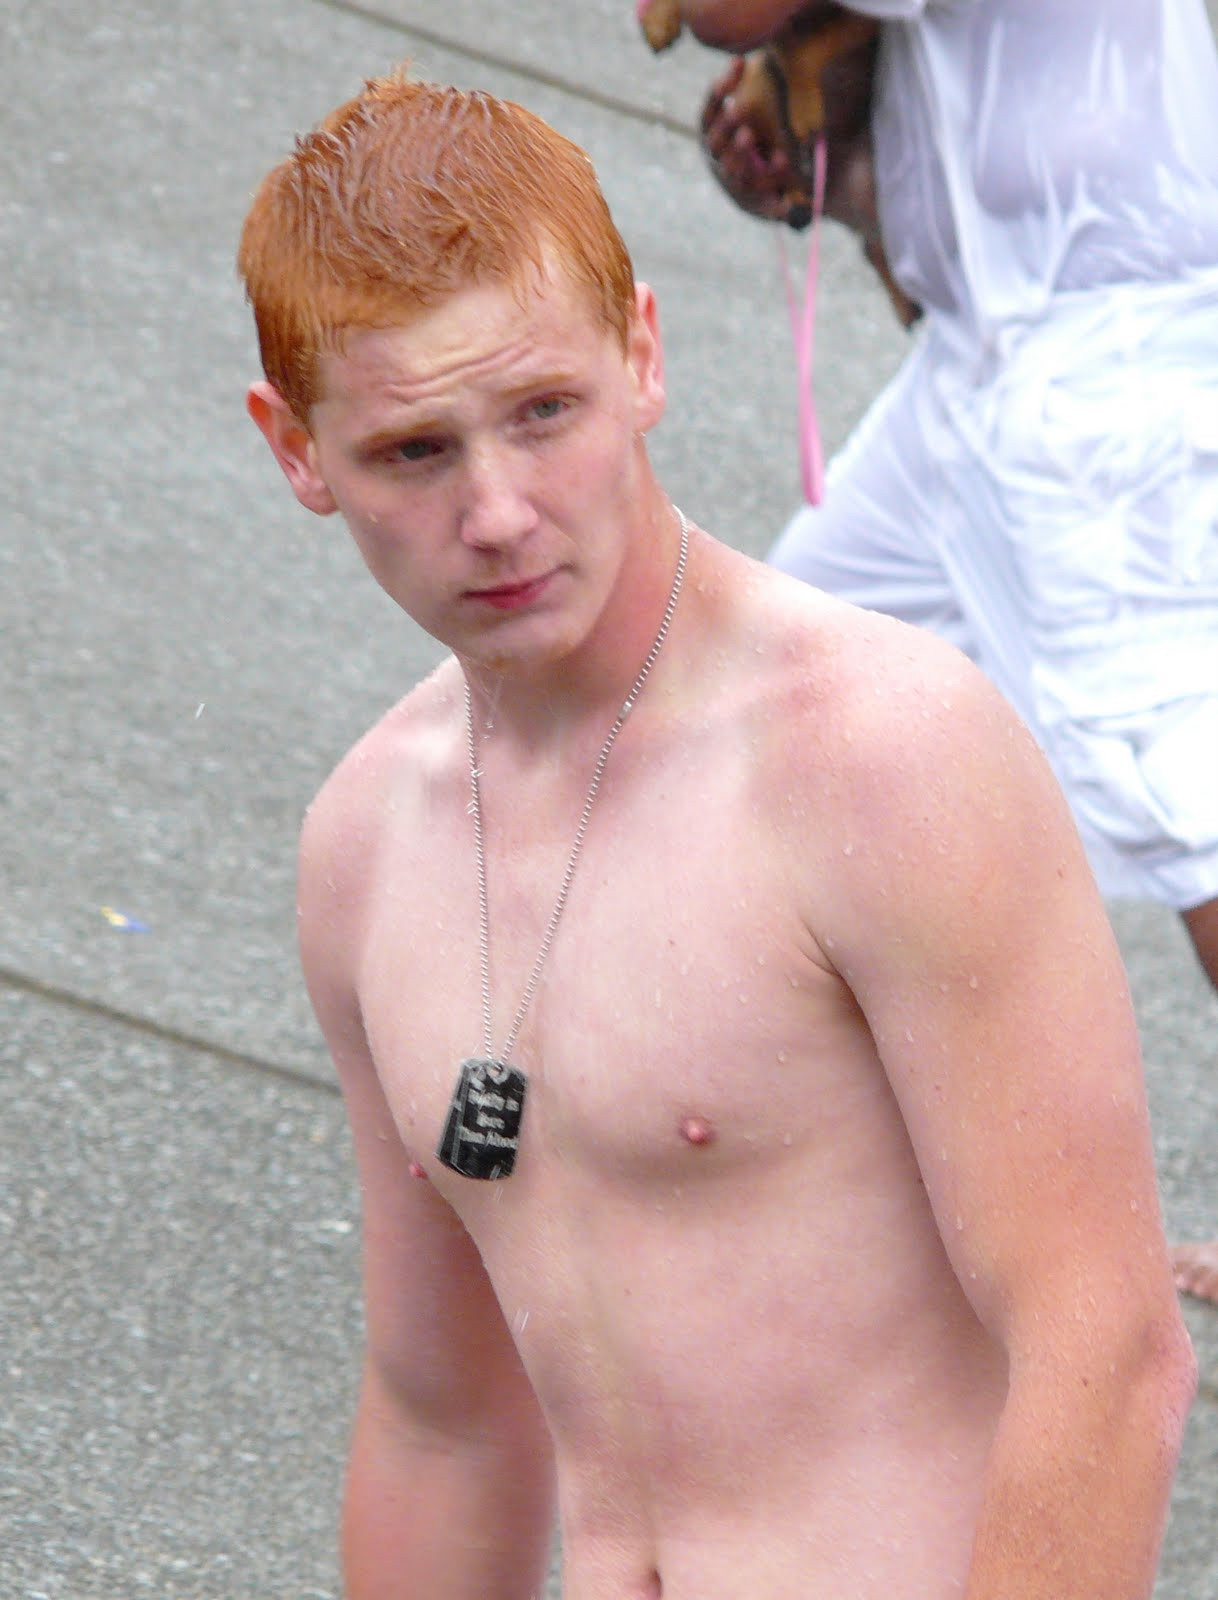 Male Pubic Hairstyles Pictures
 Red Headed Men Shirtless Freckled Gingers